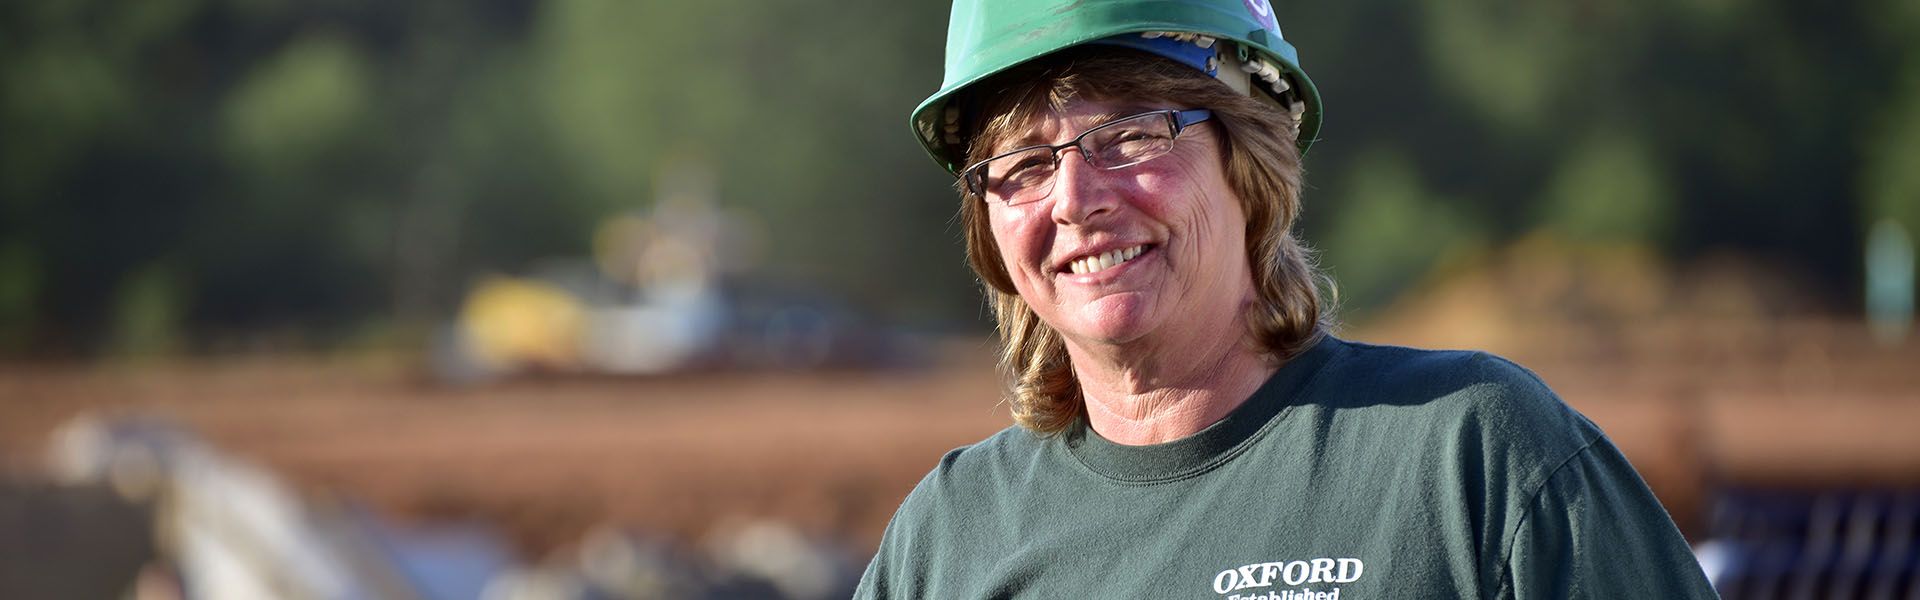 A female CDL driver smiles while on site of her road construction job in Georgia